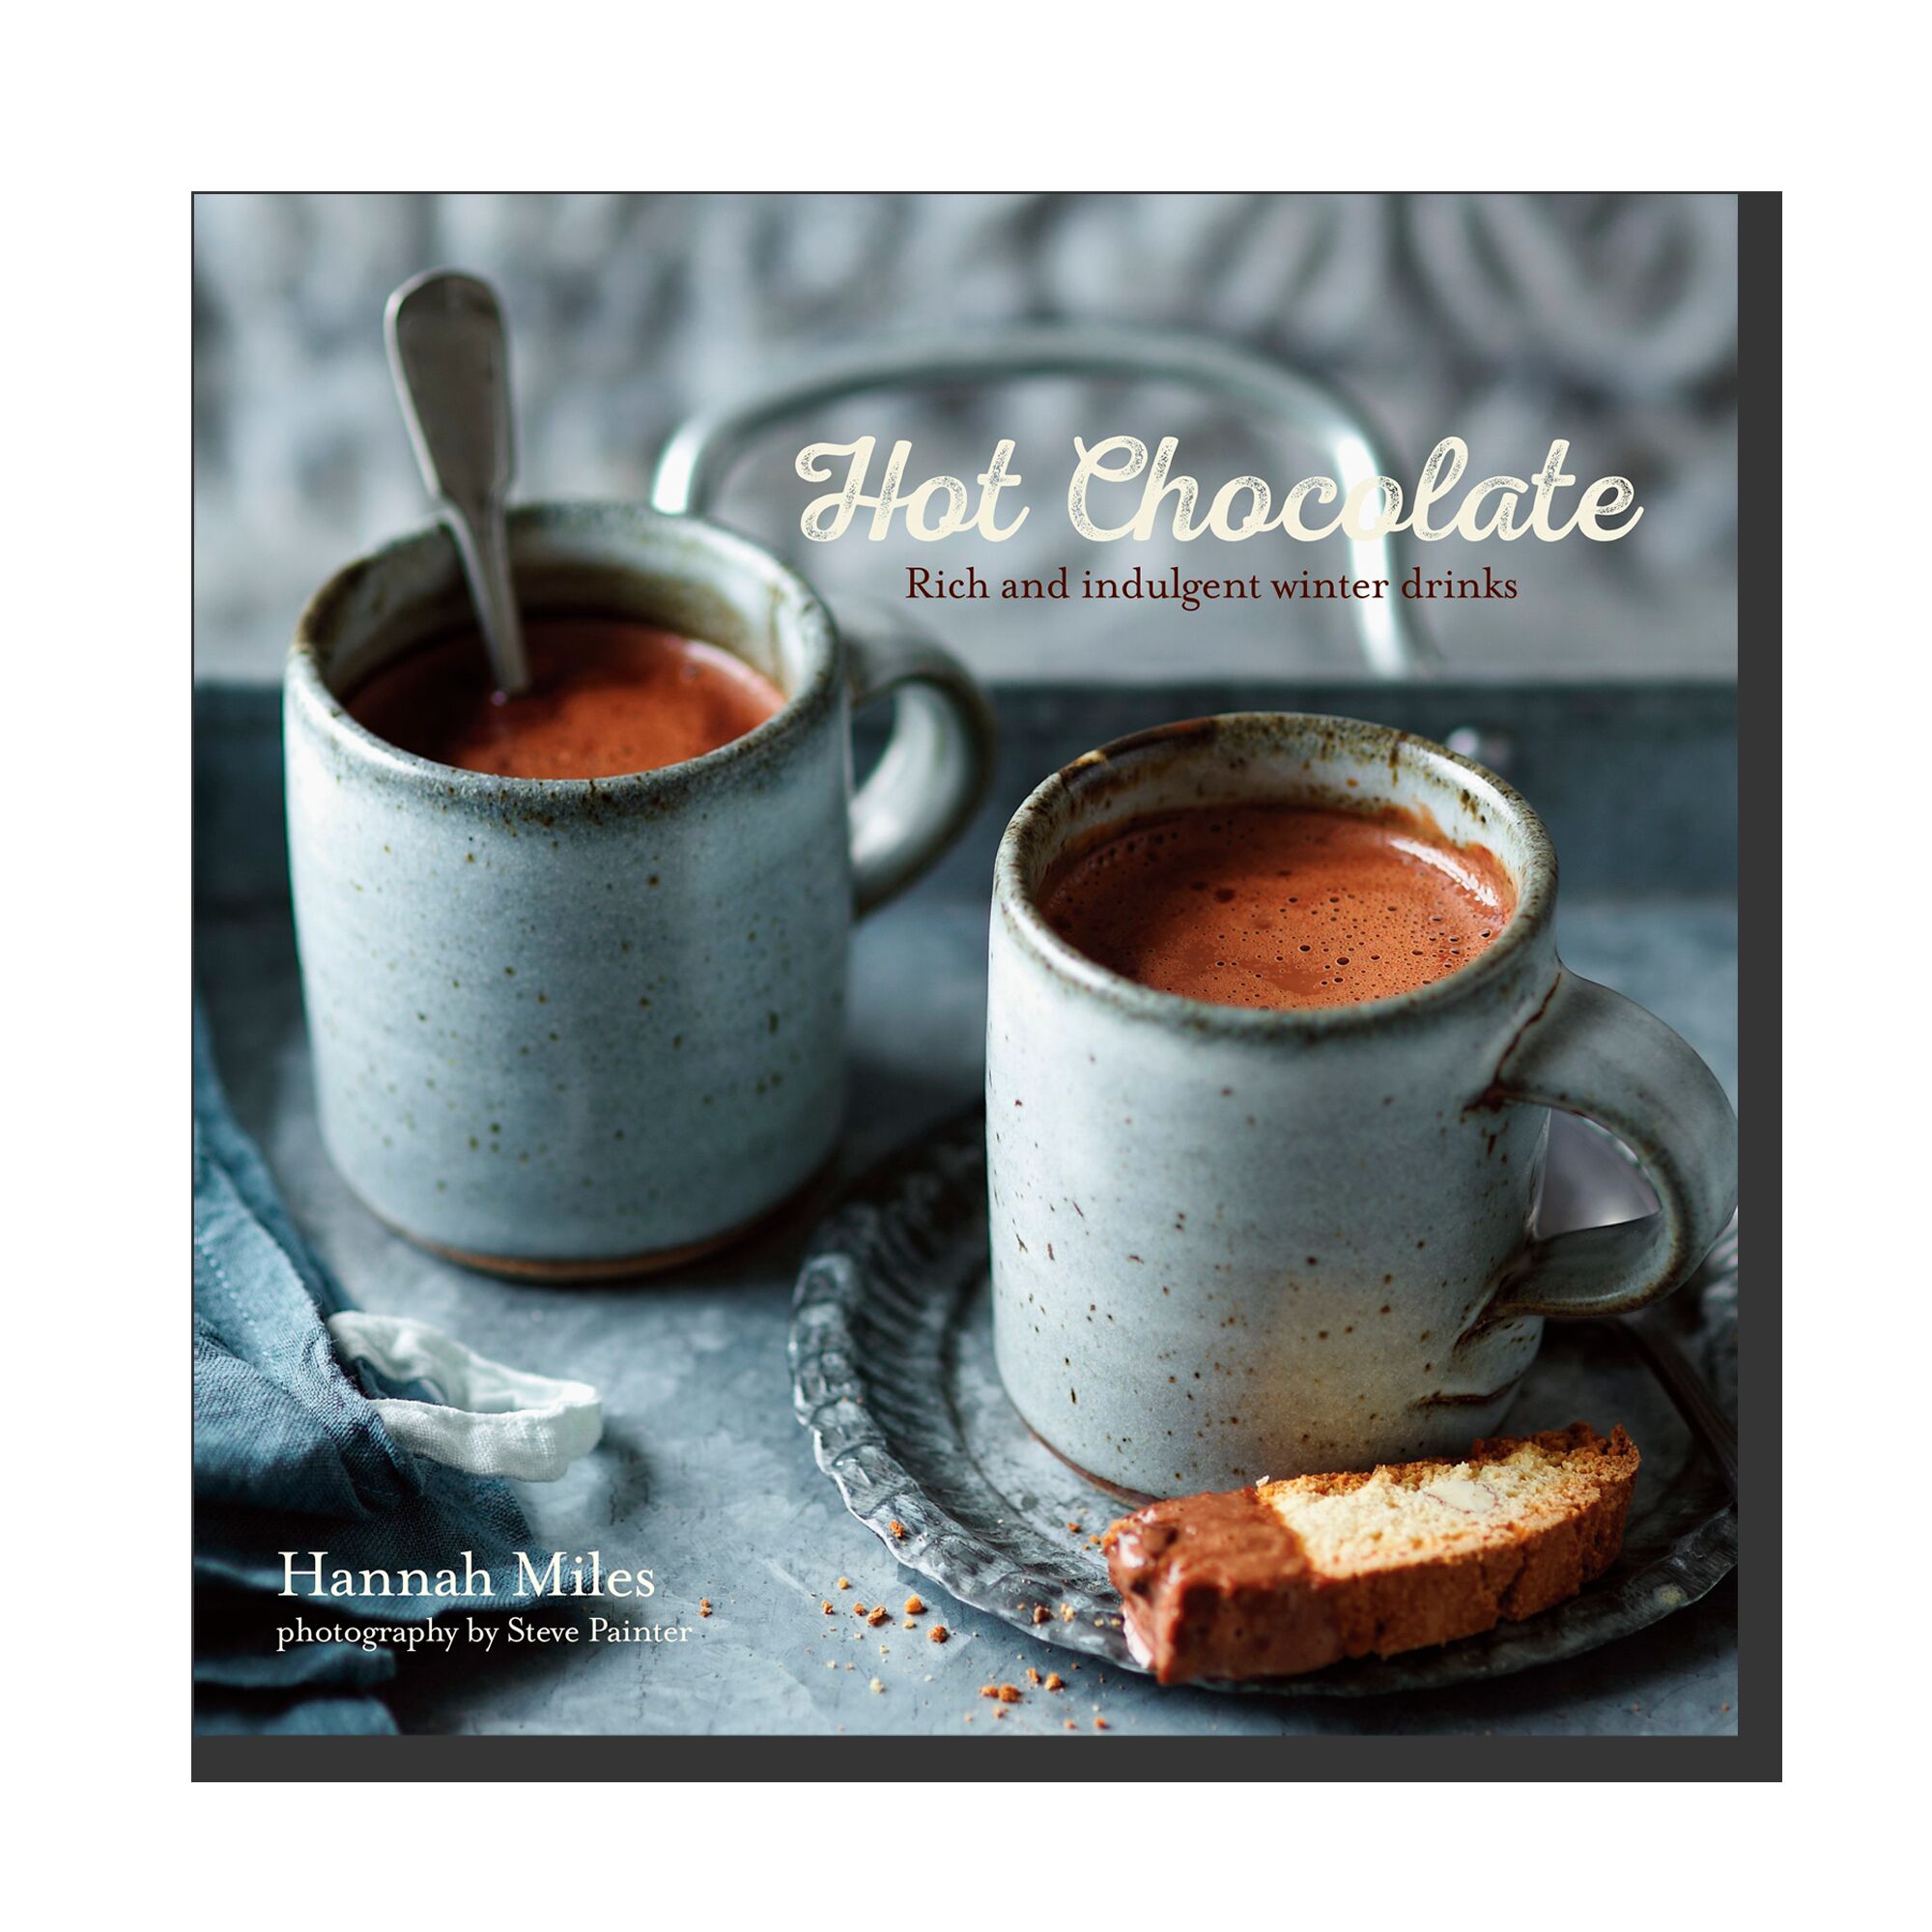 Hot Chocolate: Rich and indulgent winter drinks